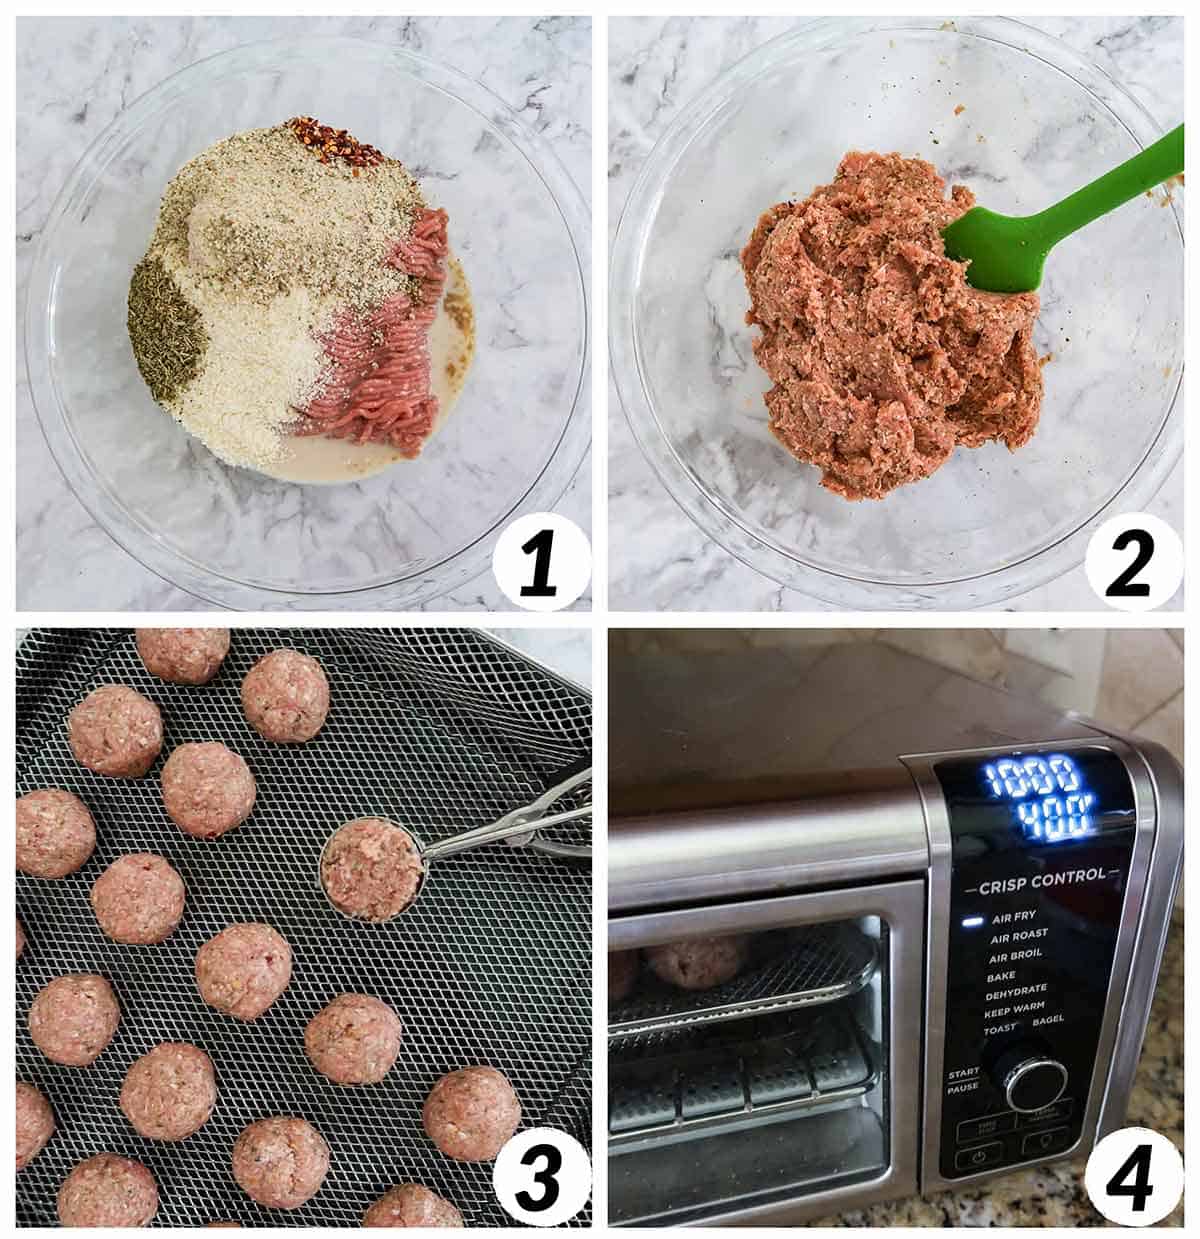 Four panel collage of process shots- combining ingredients, forming meatballs, and baking in air fryer.